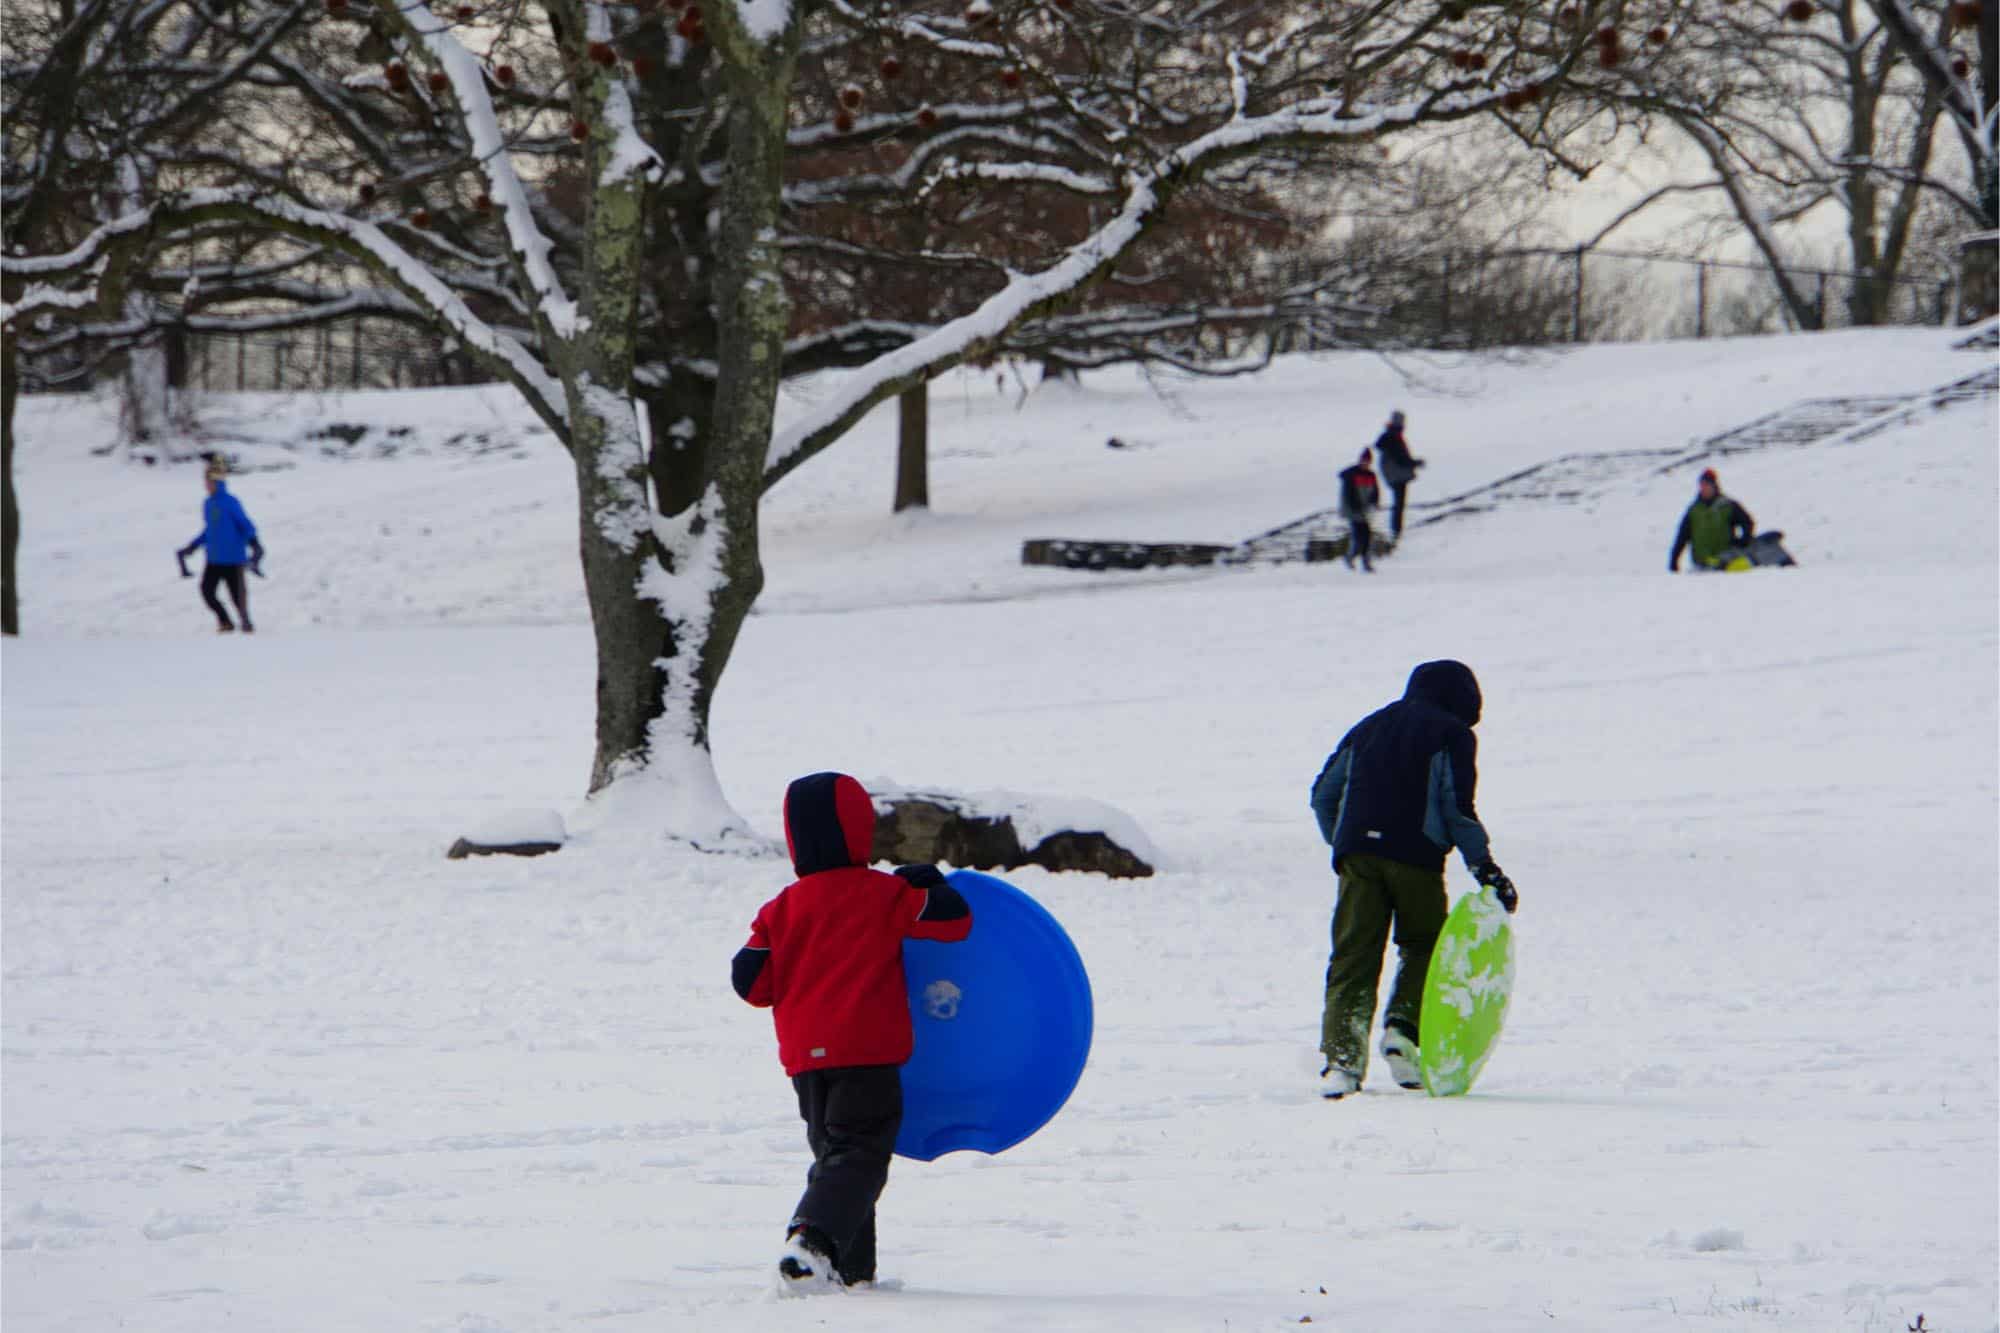 Kids with sleds in a snowy park